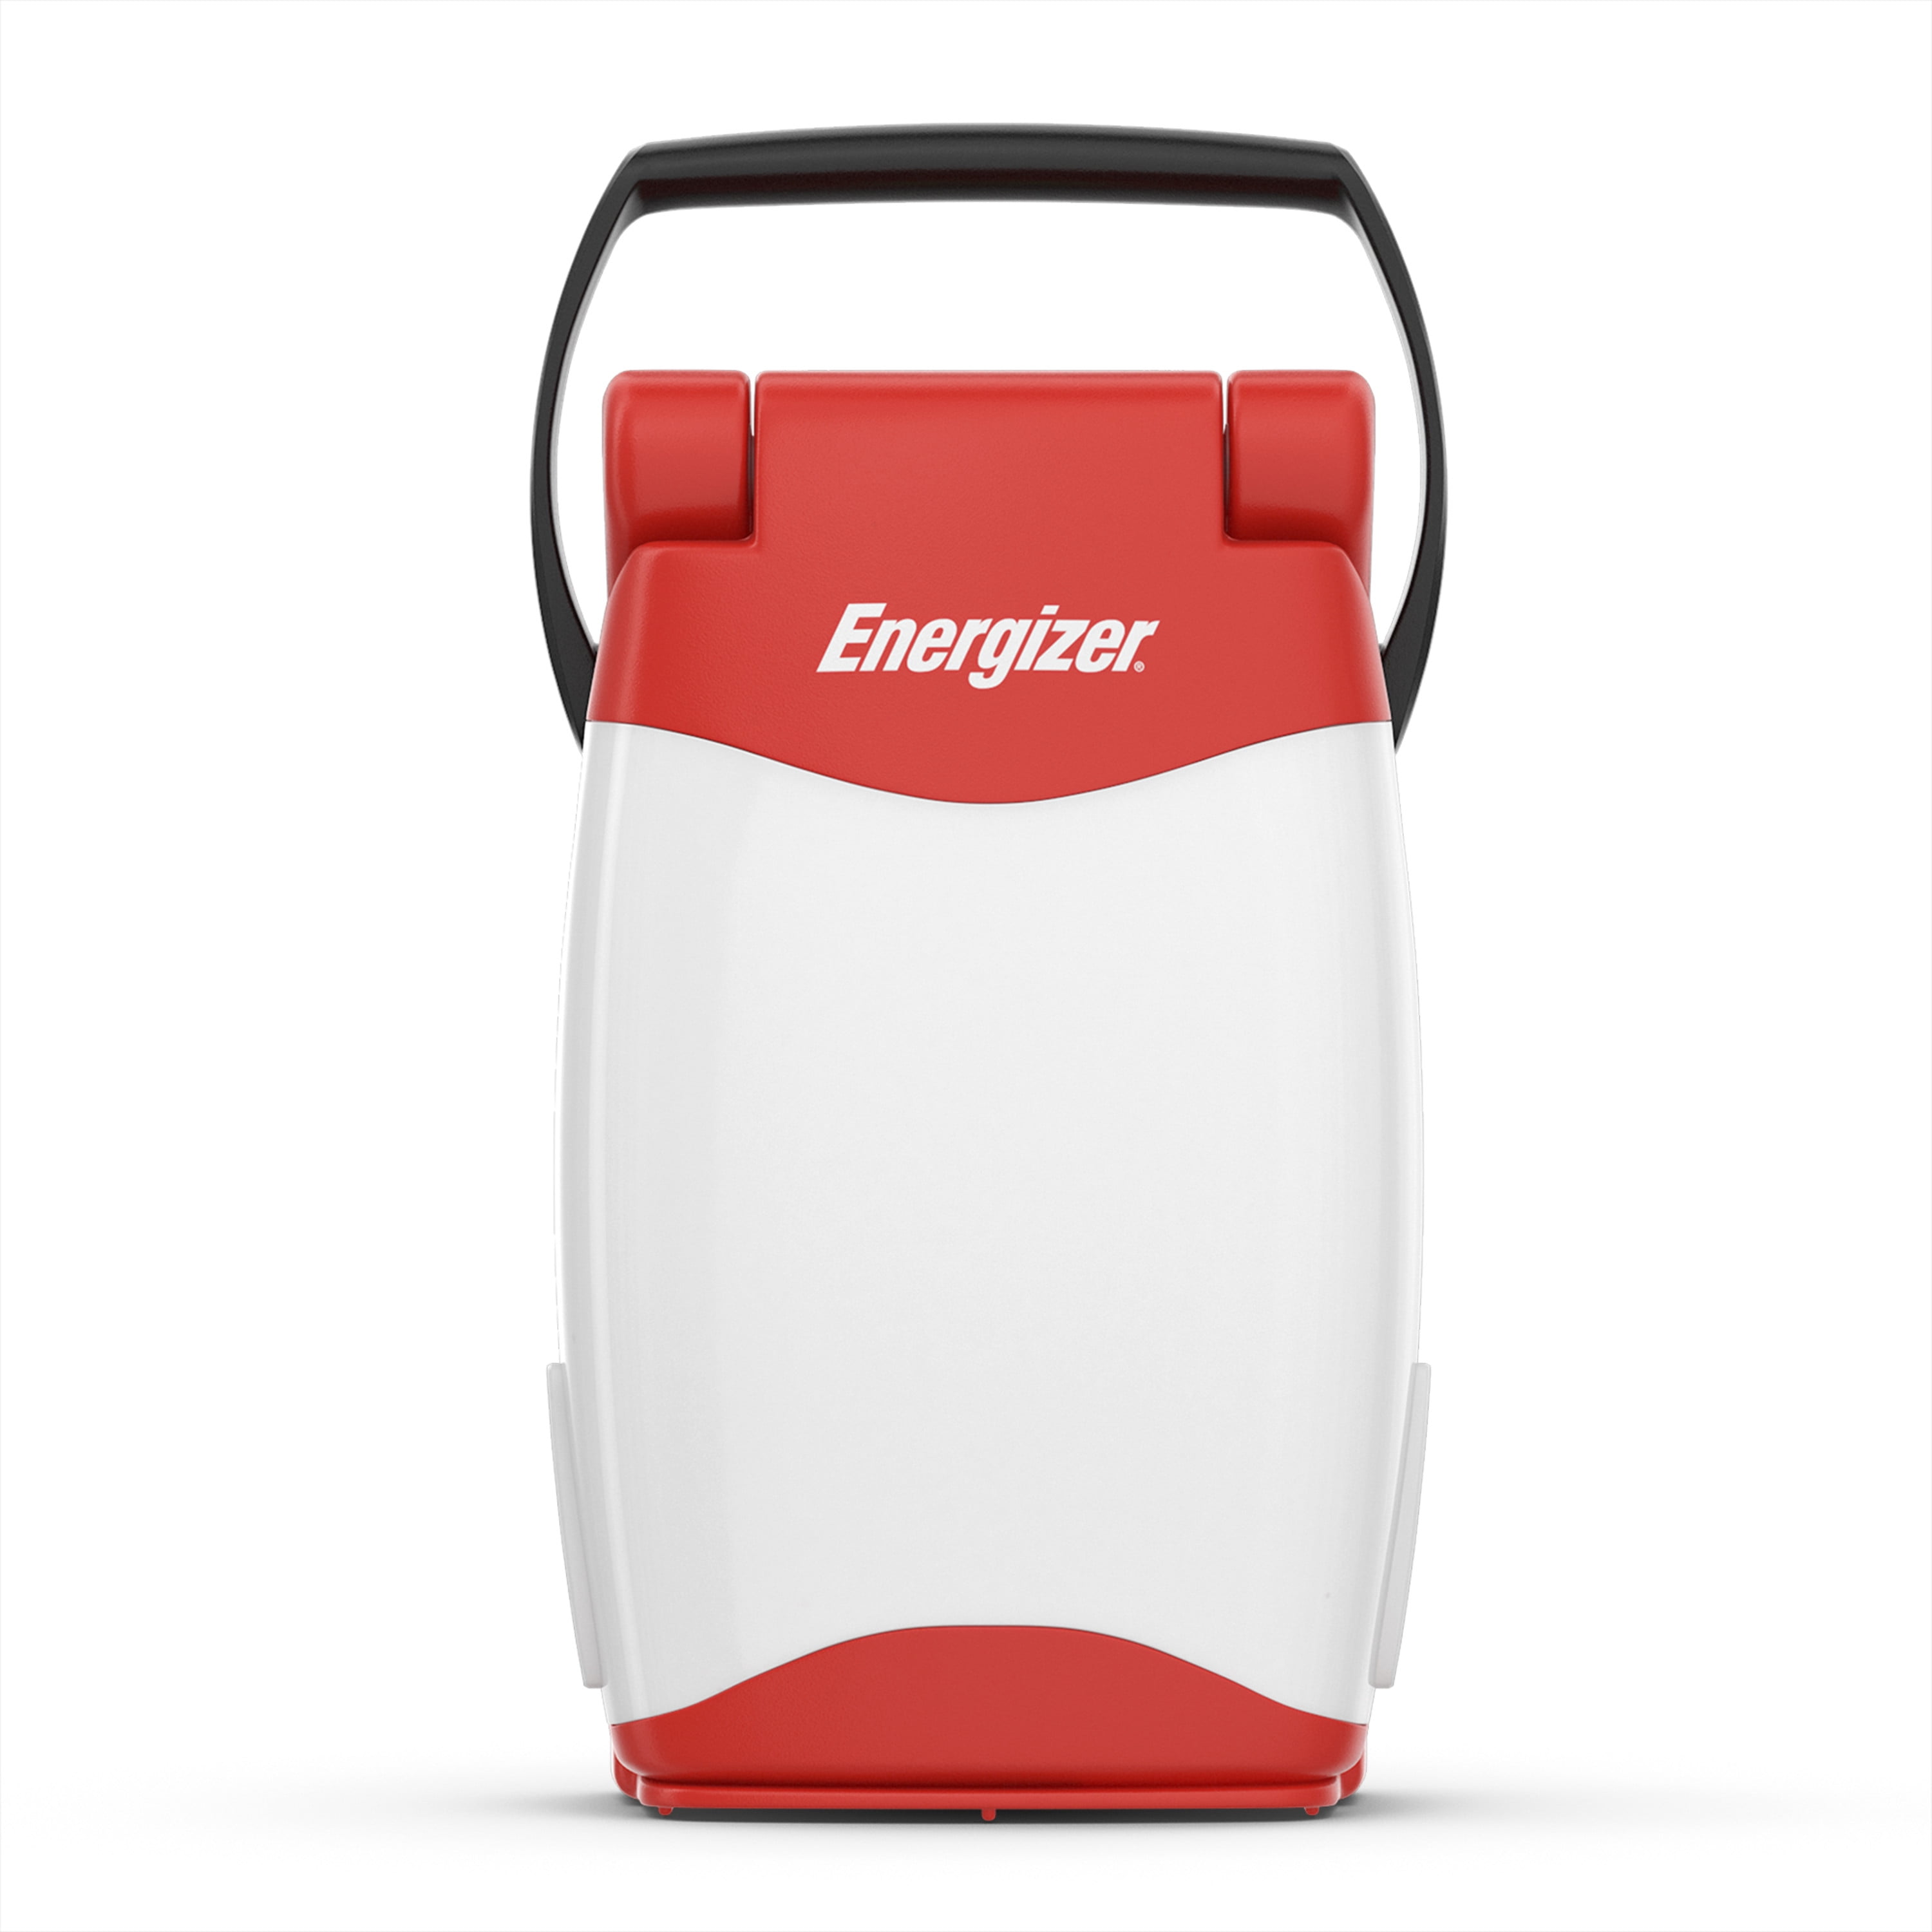 Outfitters Eighty Six Rechargeable Electric Lantern - Red by Sportsman's Warehouse